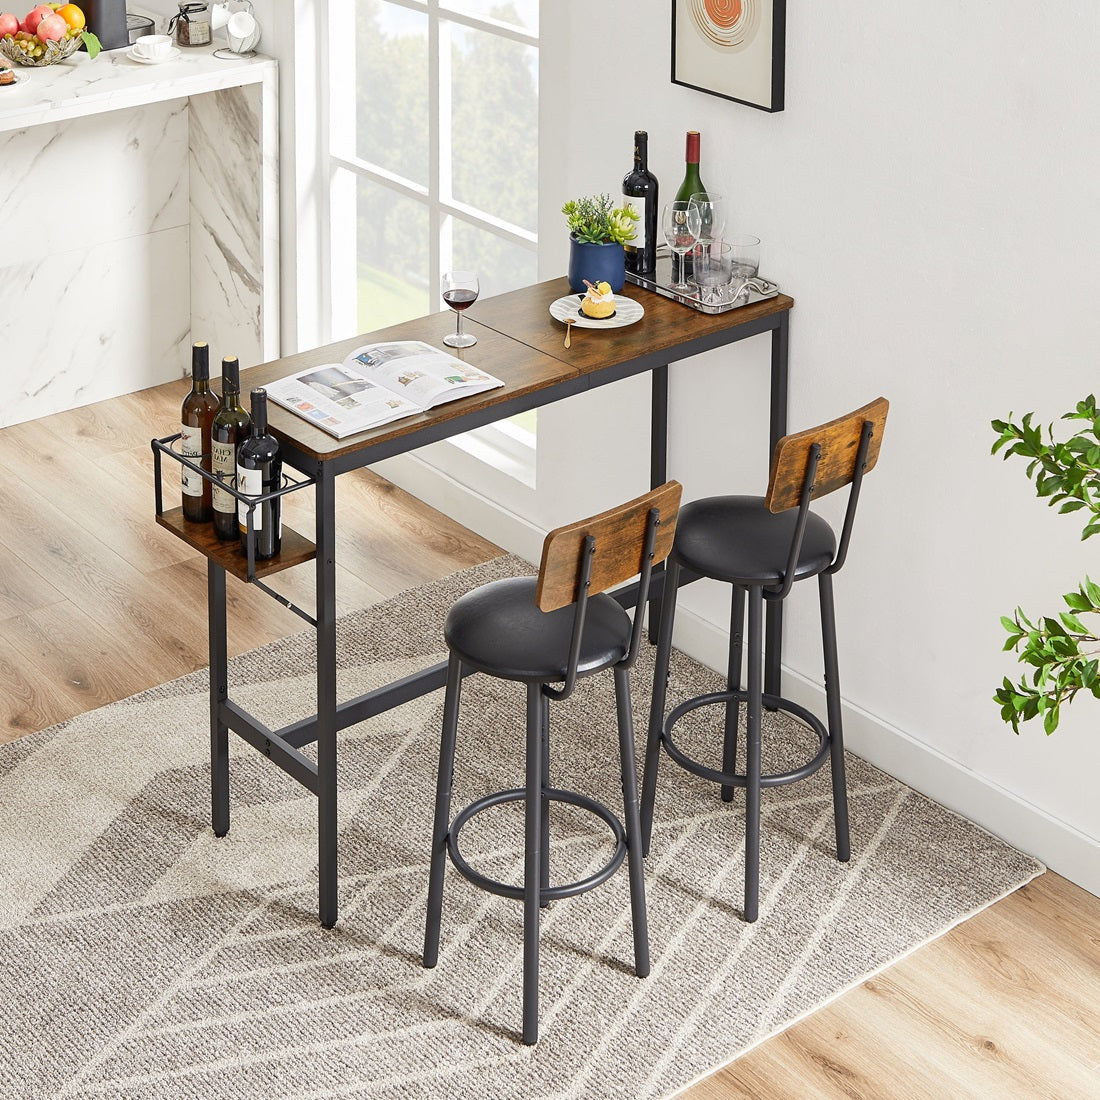 1st Choice Furniture Direct Bar Table Set 1st Choice Rustic Brown Bar Table Set with Wine Bottle Storage